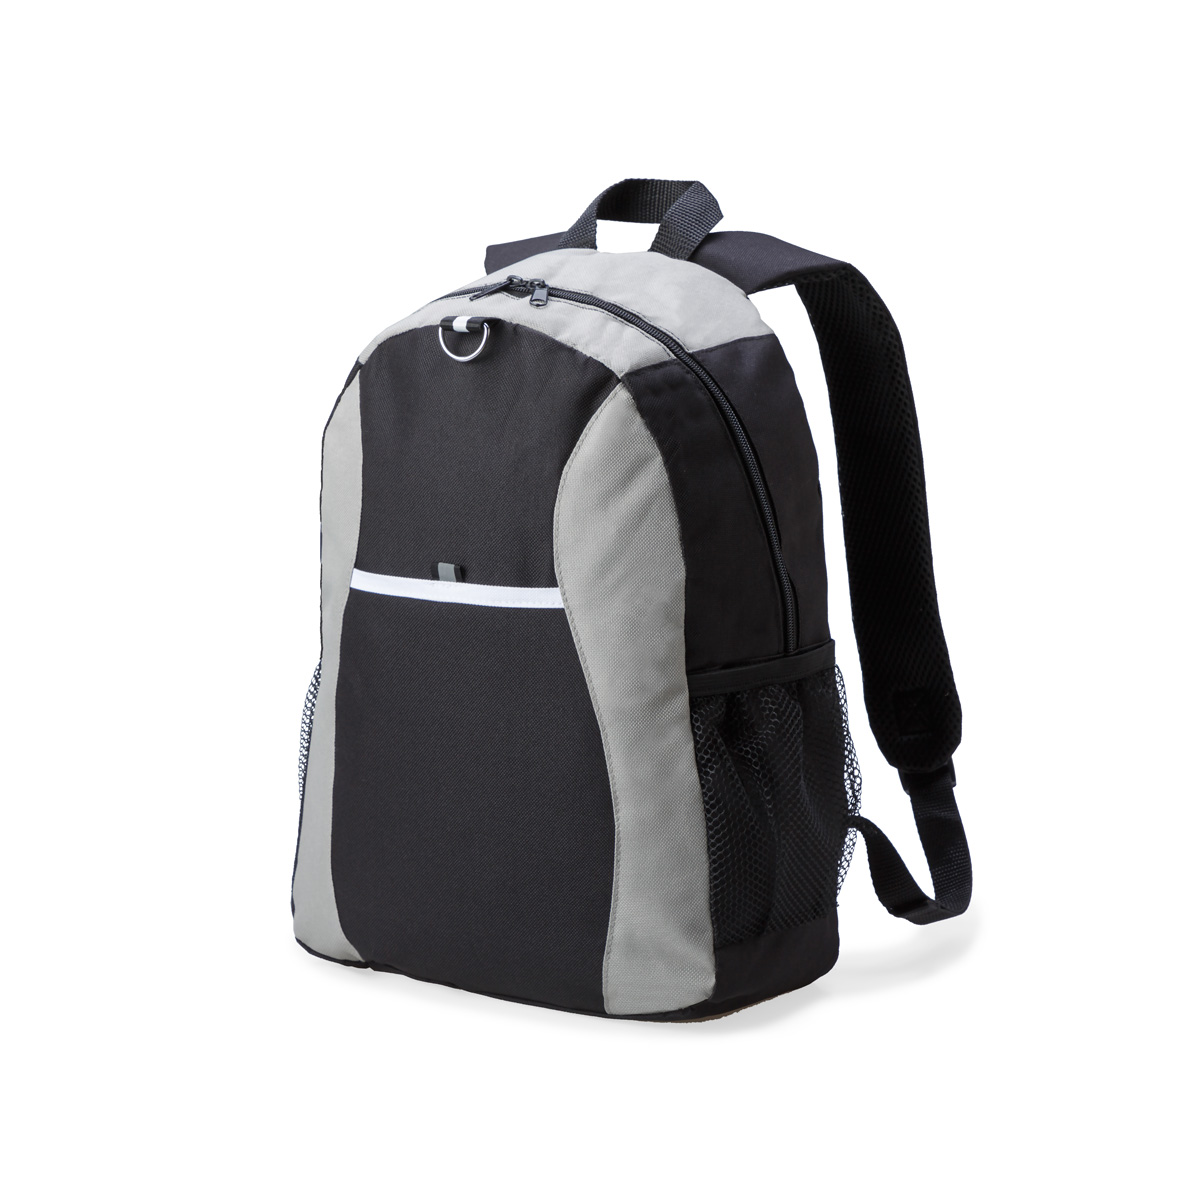 Tribeca Backpack Product Image